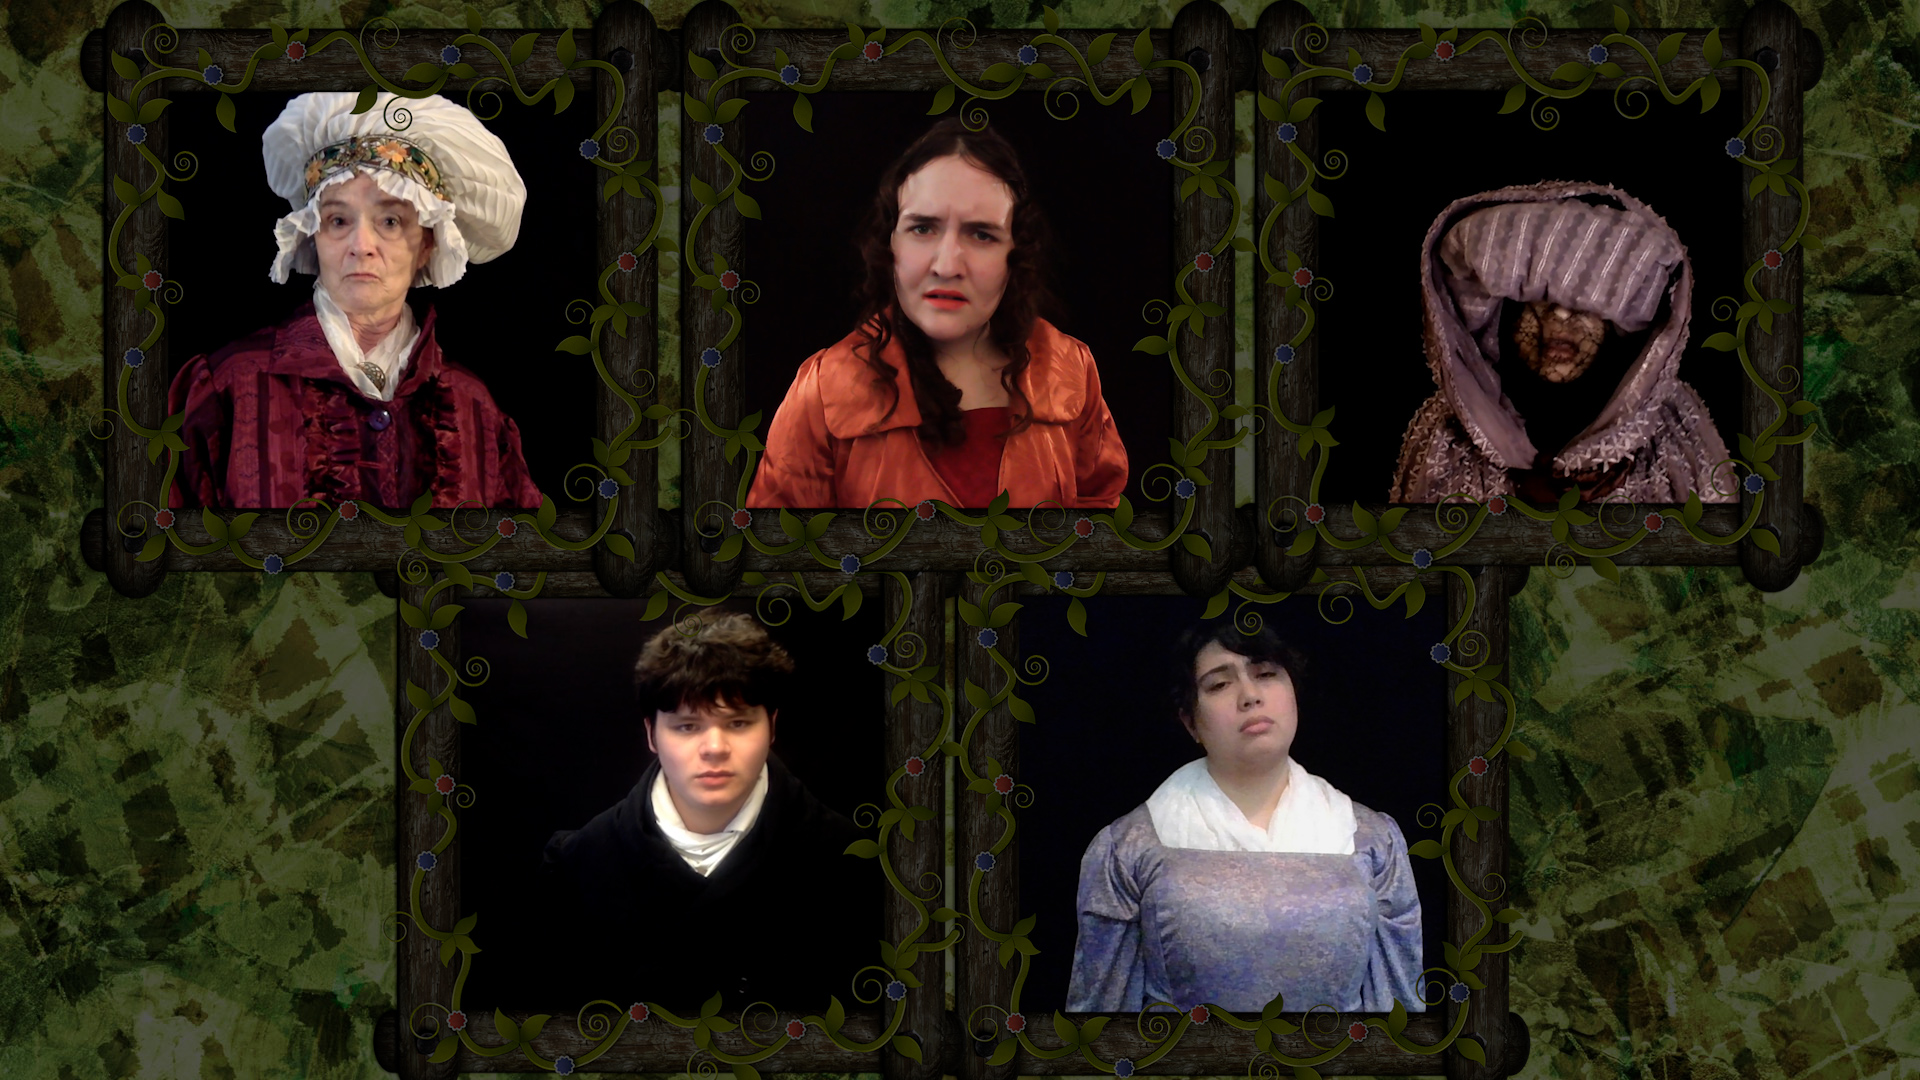 The cast virtually performing the scene: Anne Speaks